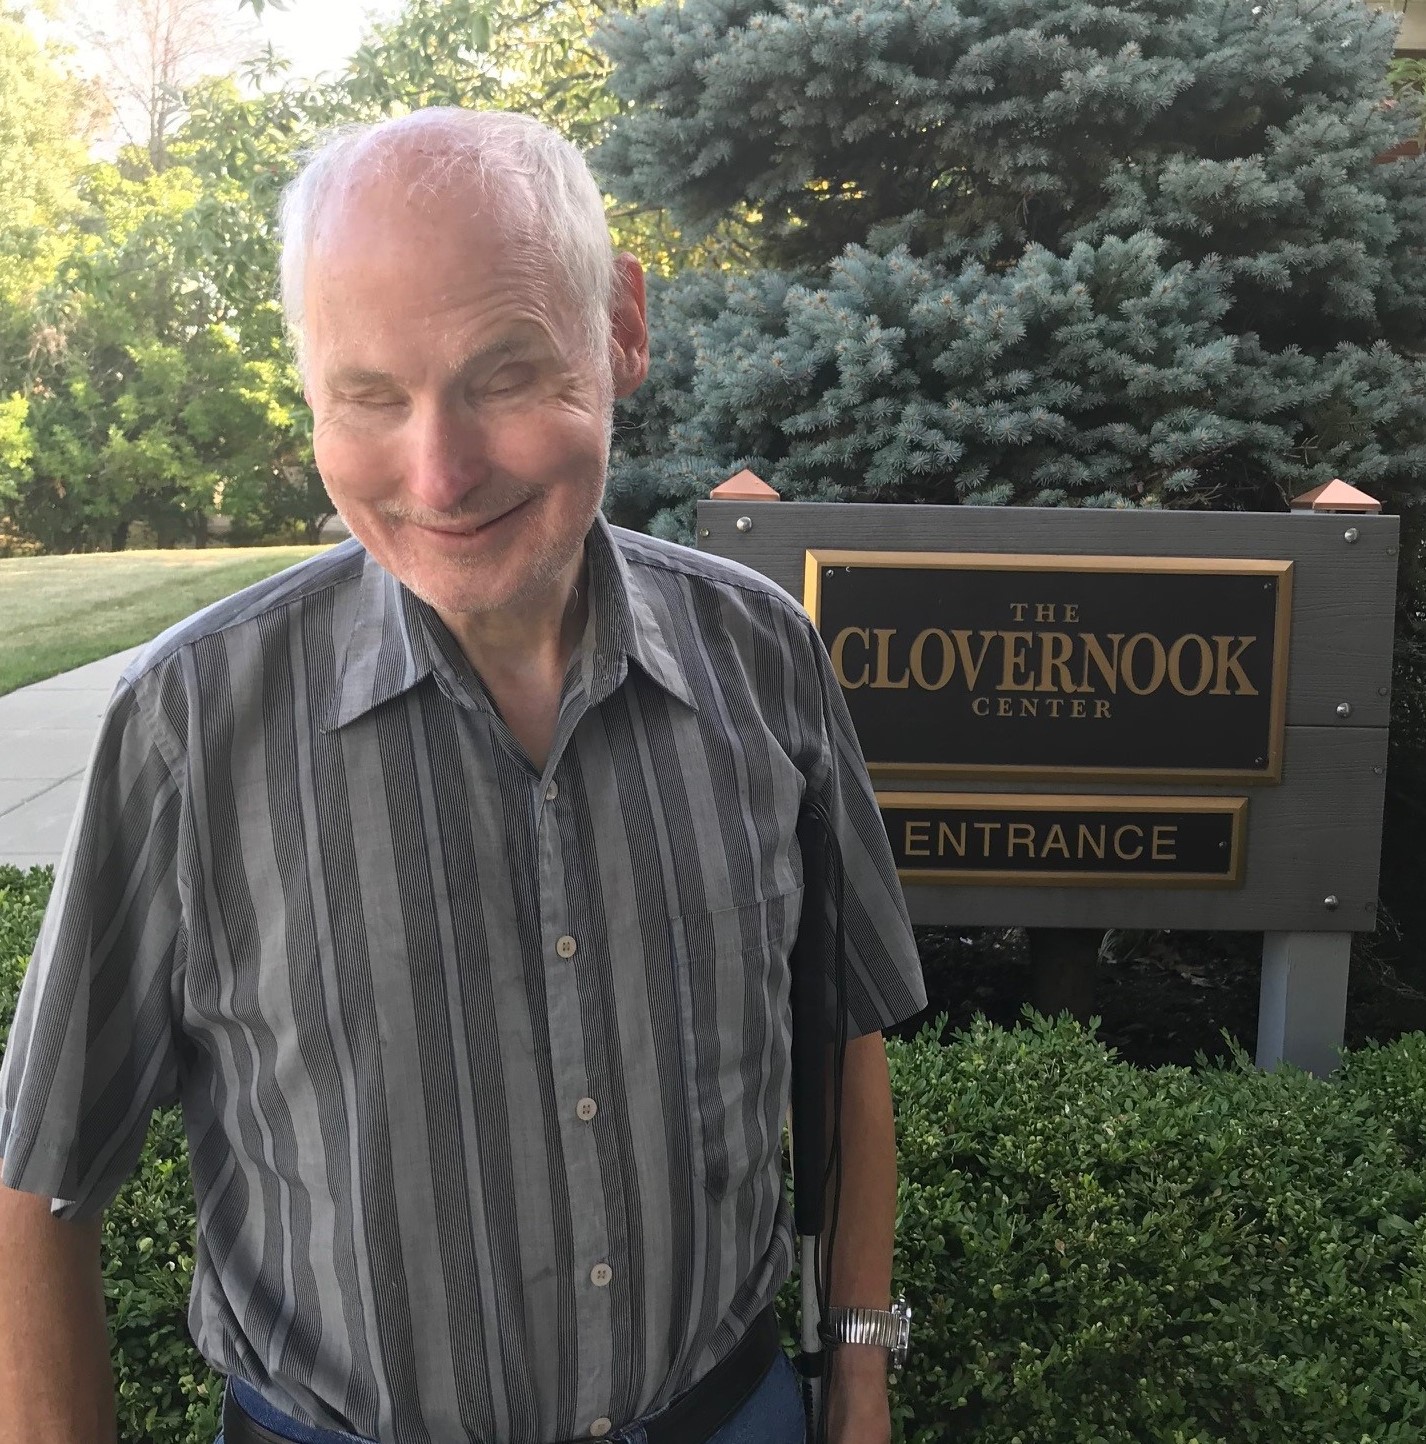 Terry posing in front of Clovernook sign